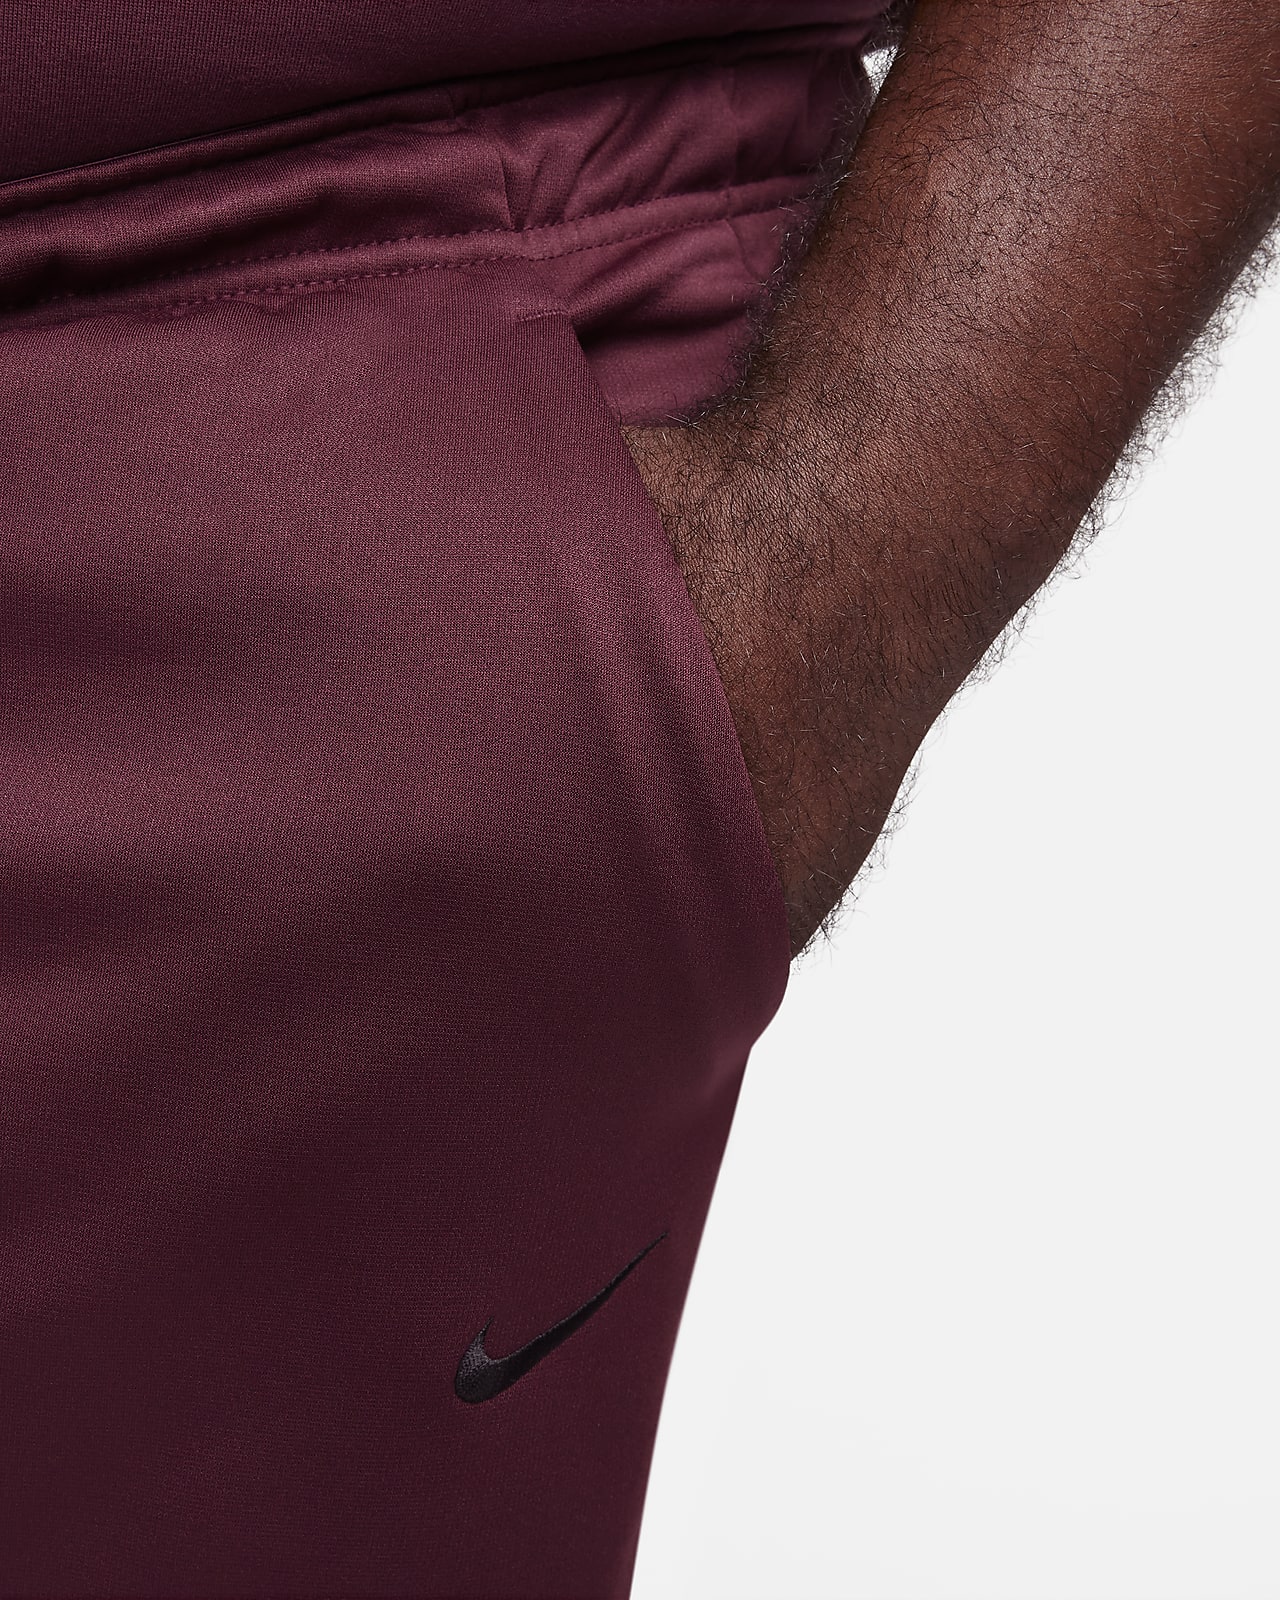 Nike Therma Men's Therma-FIT Tapered Fitness Pants